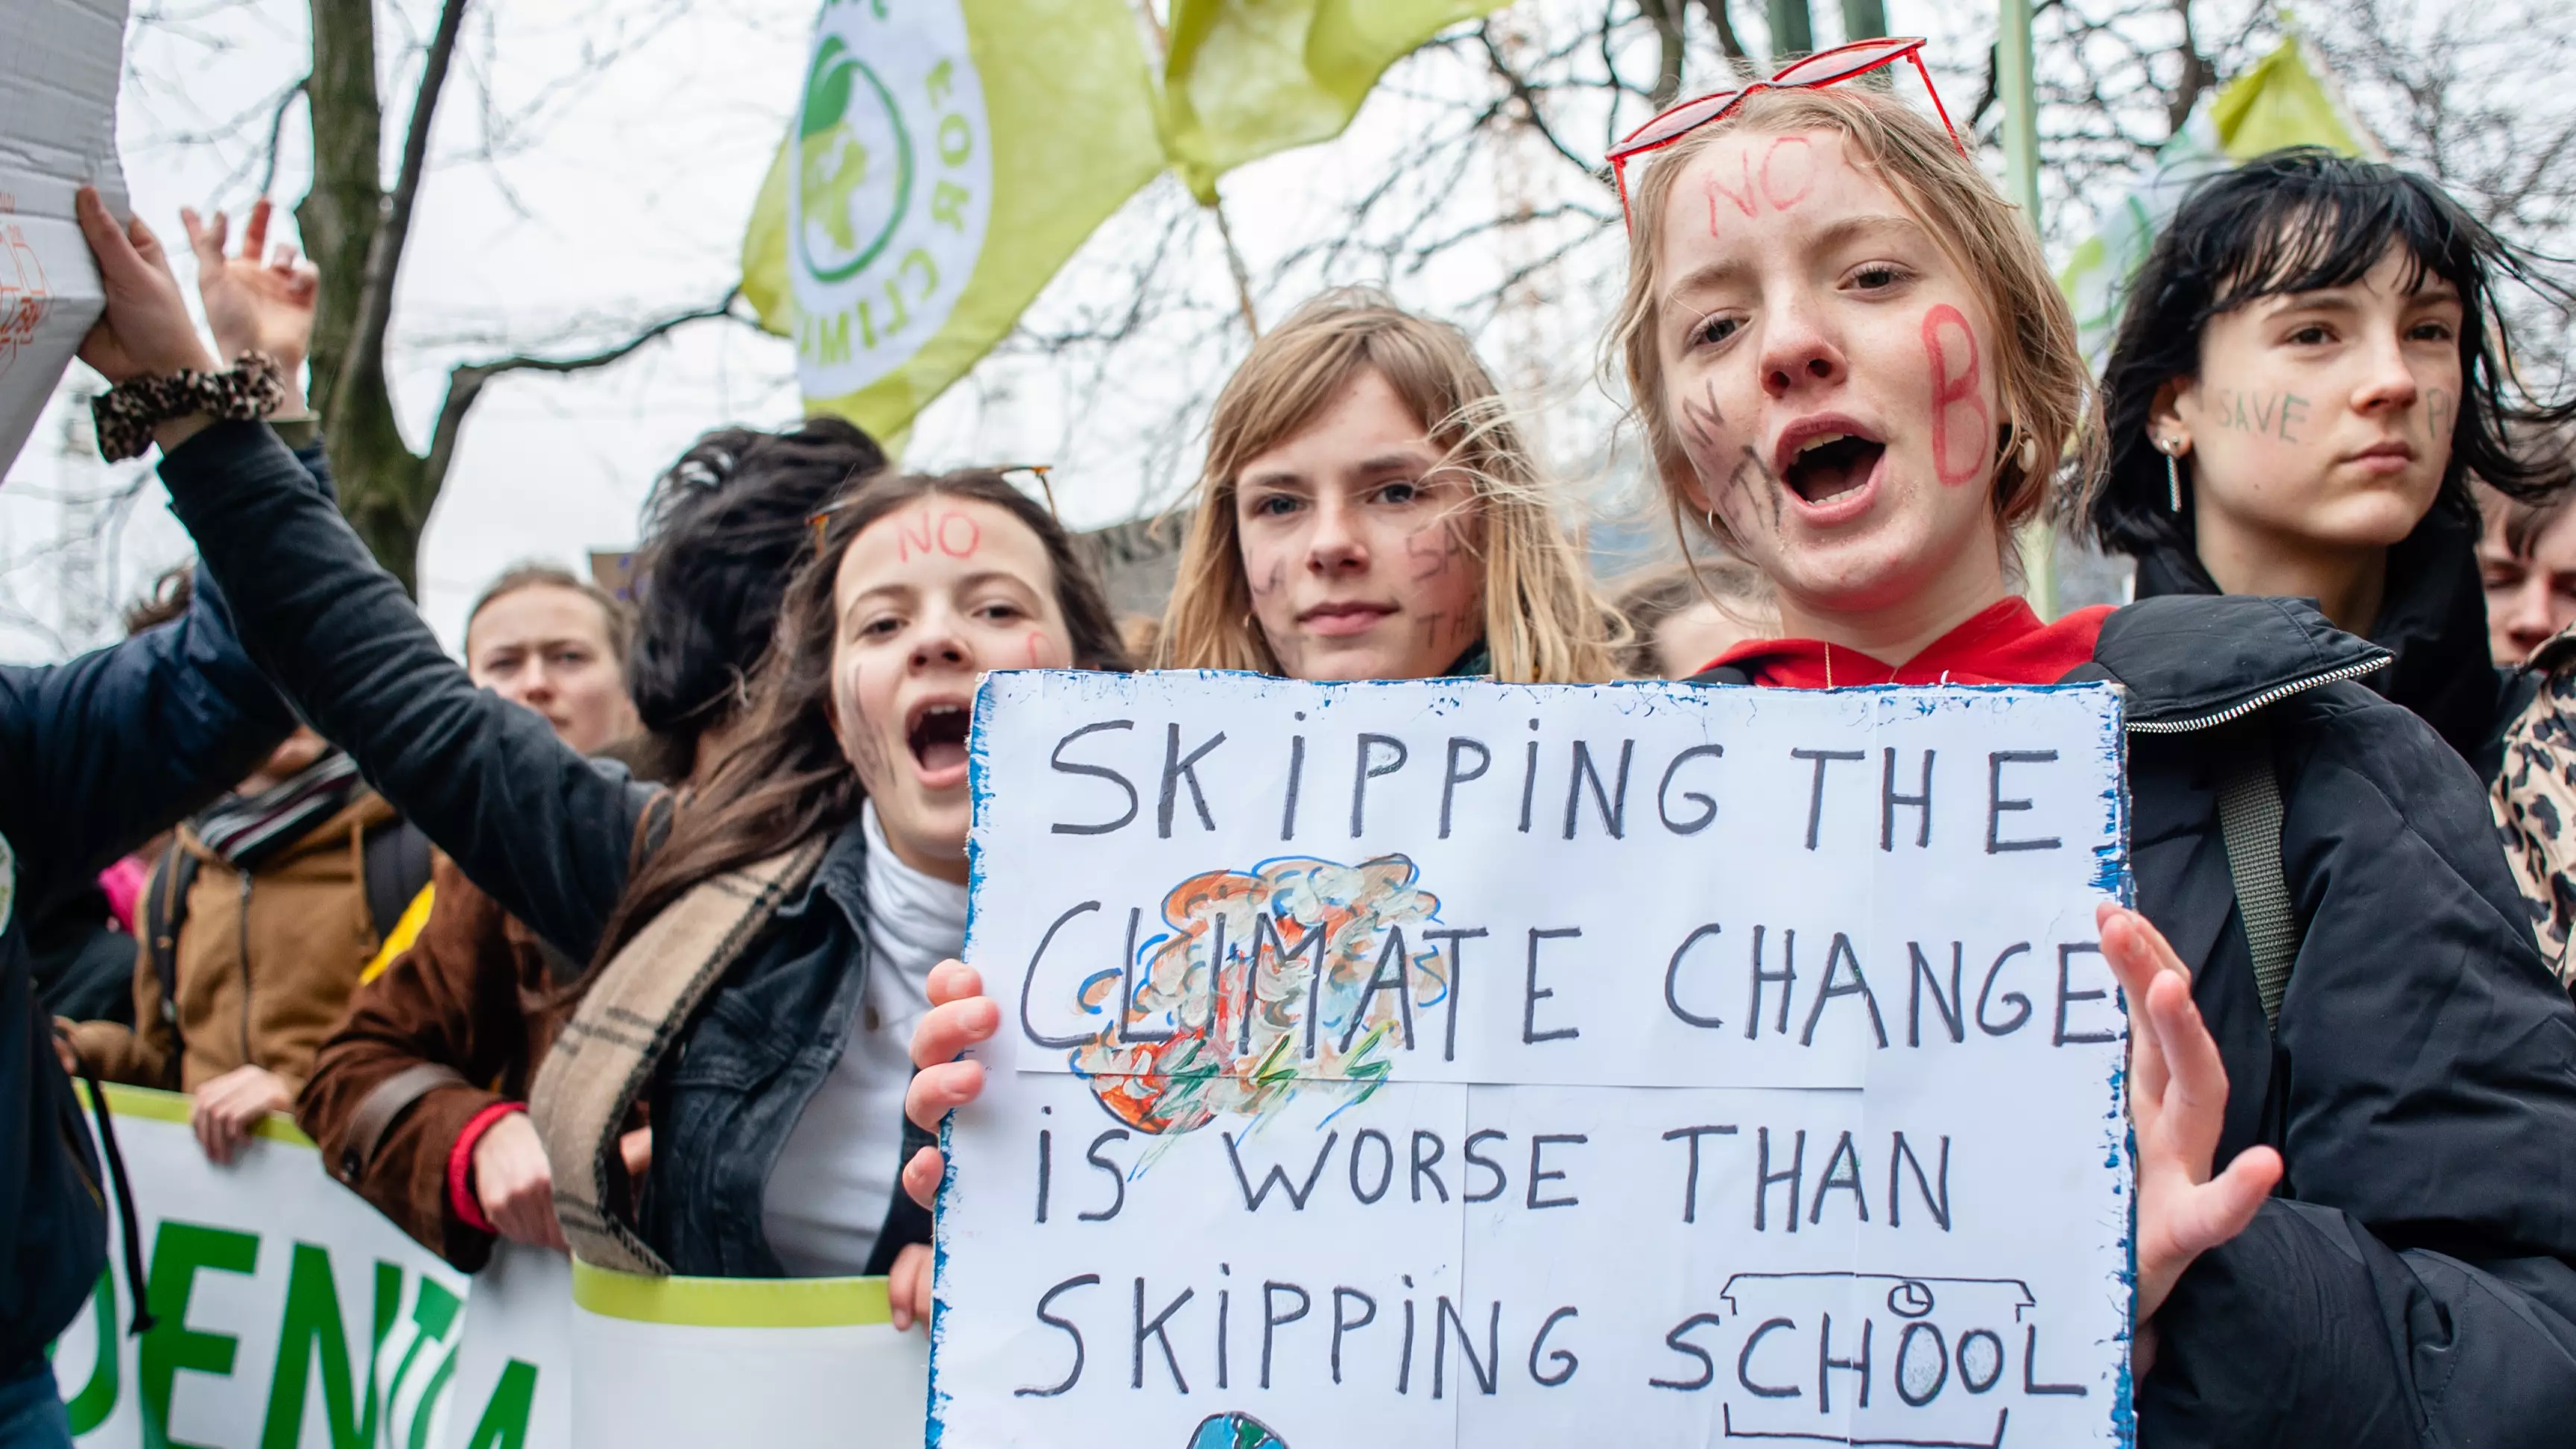 Everything You Need To Know About The Global Climate Strike Happening This Friday